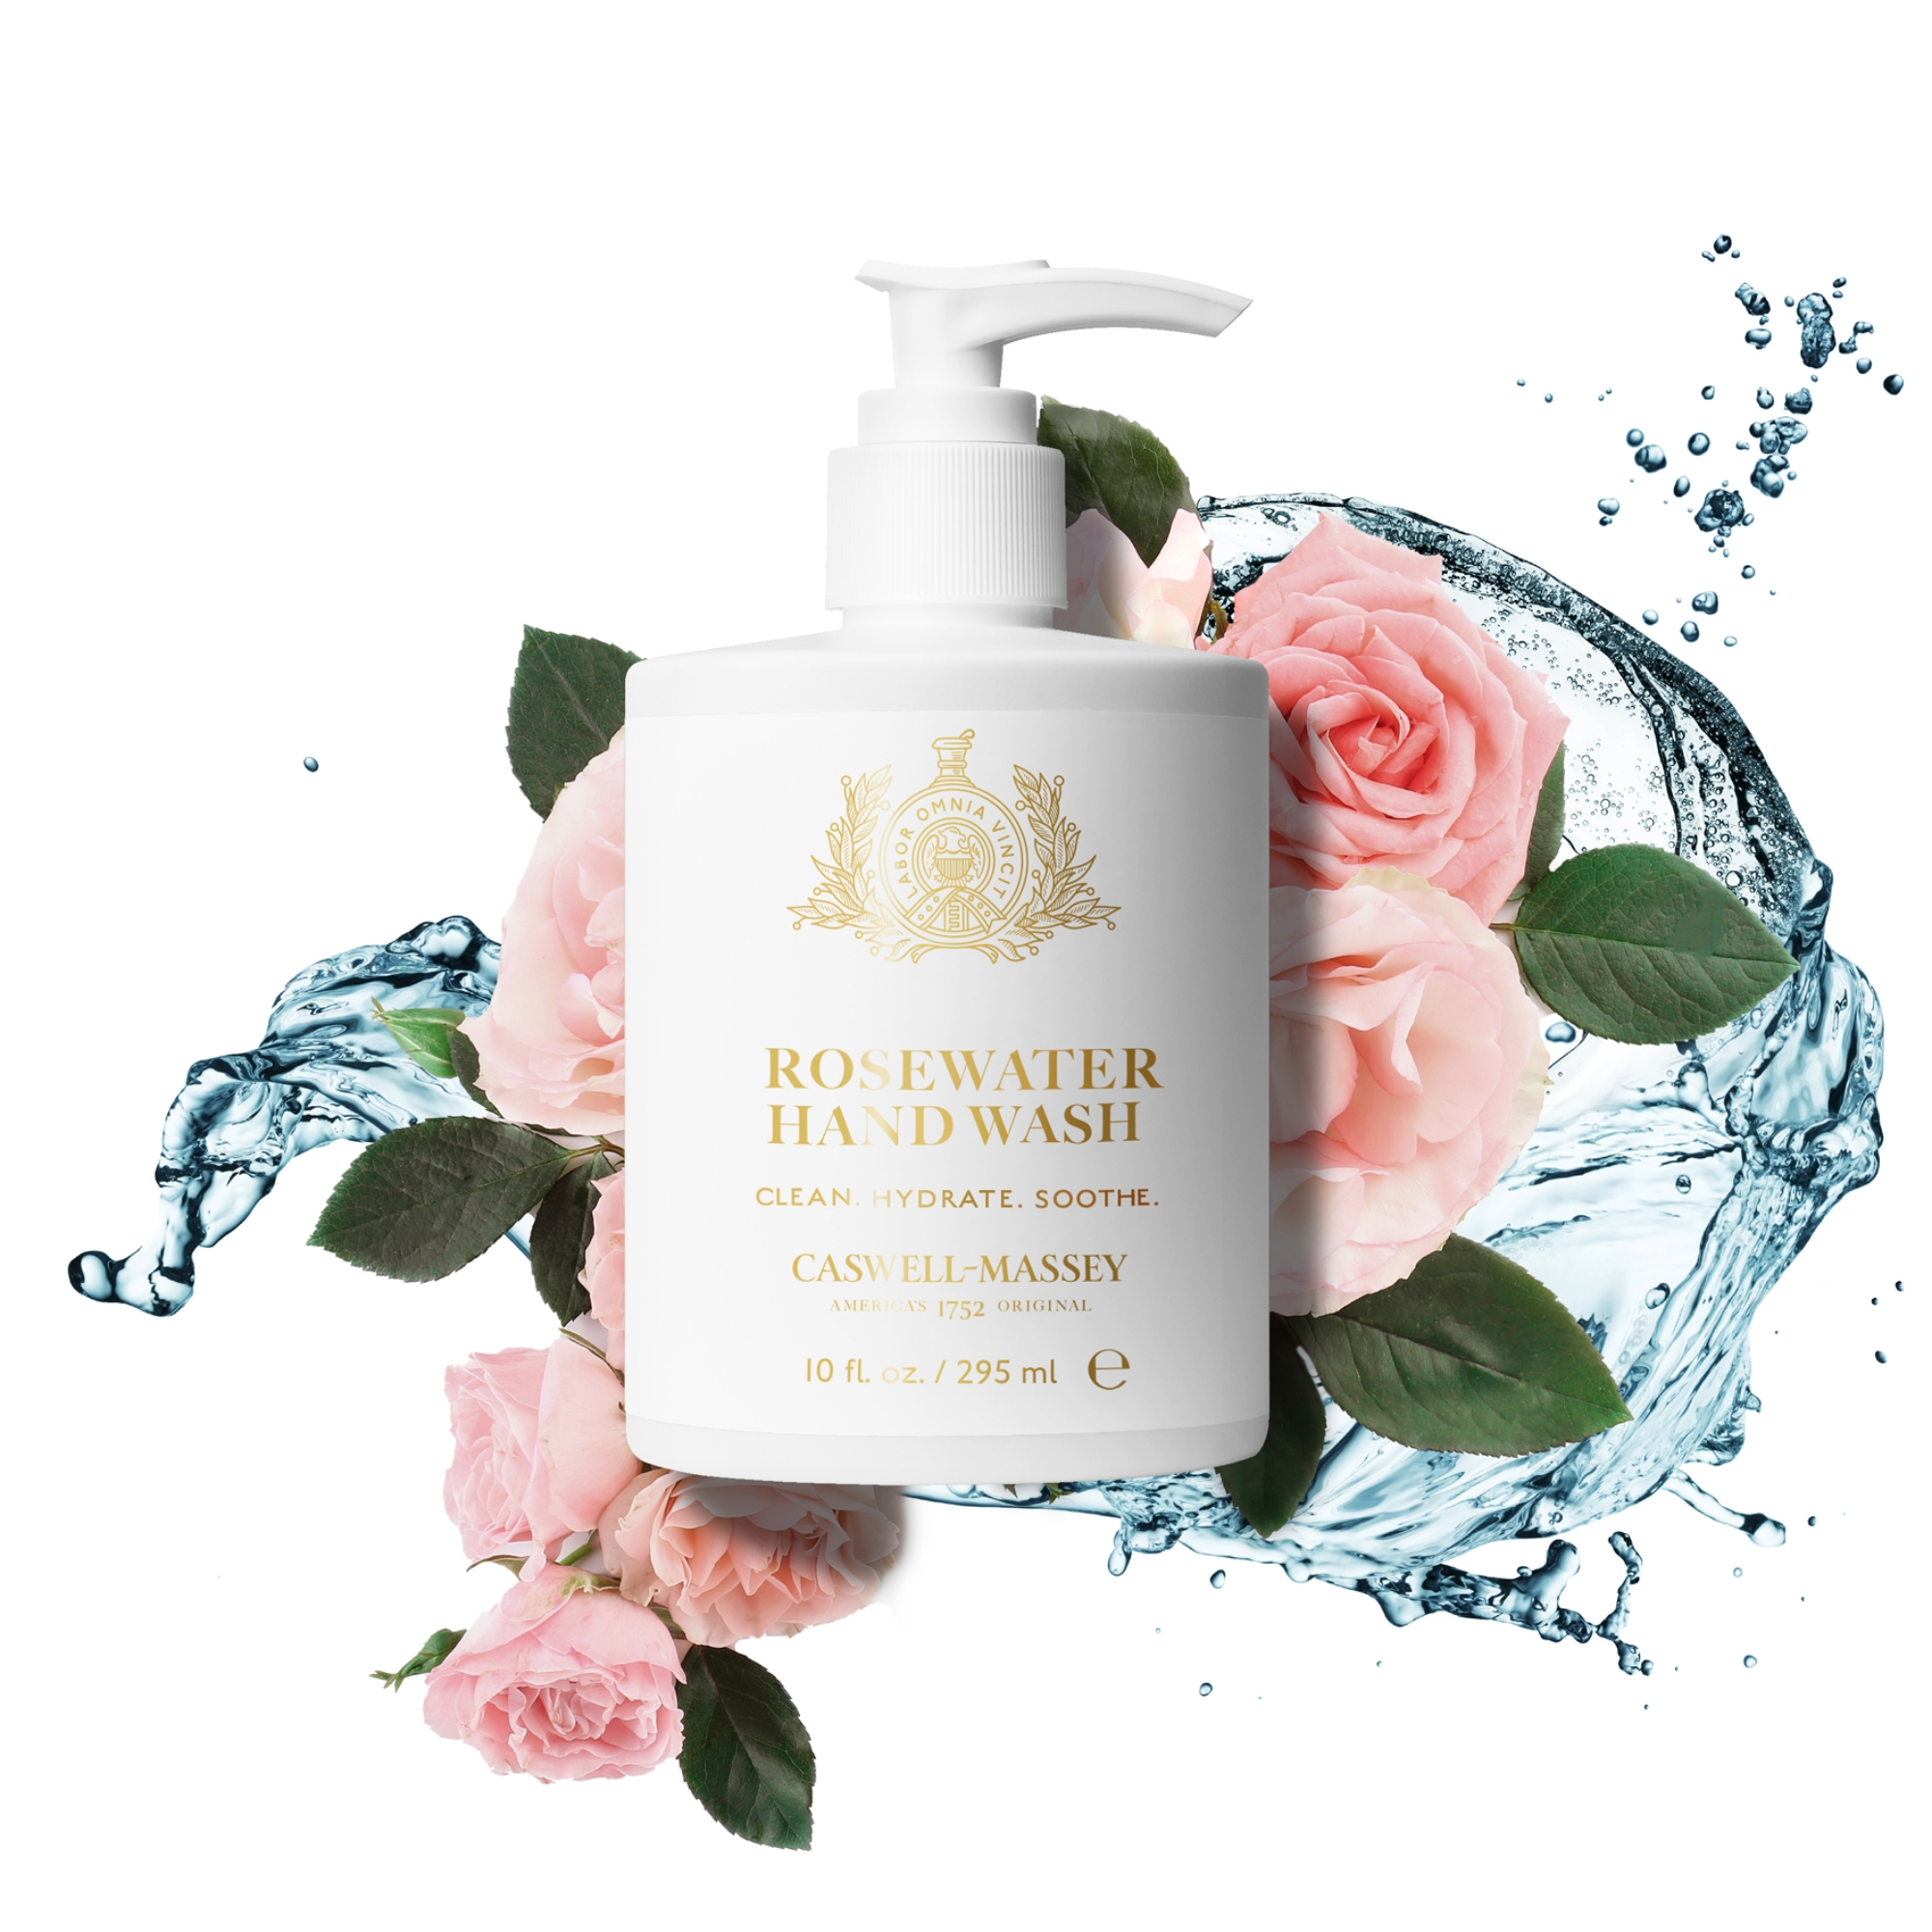 Caswell-Massey Rosewater Hand Wash shown with roses